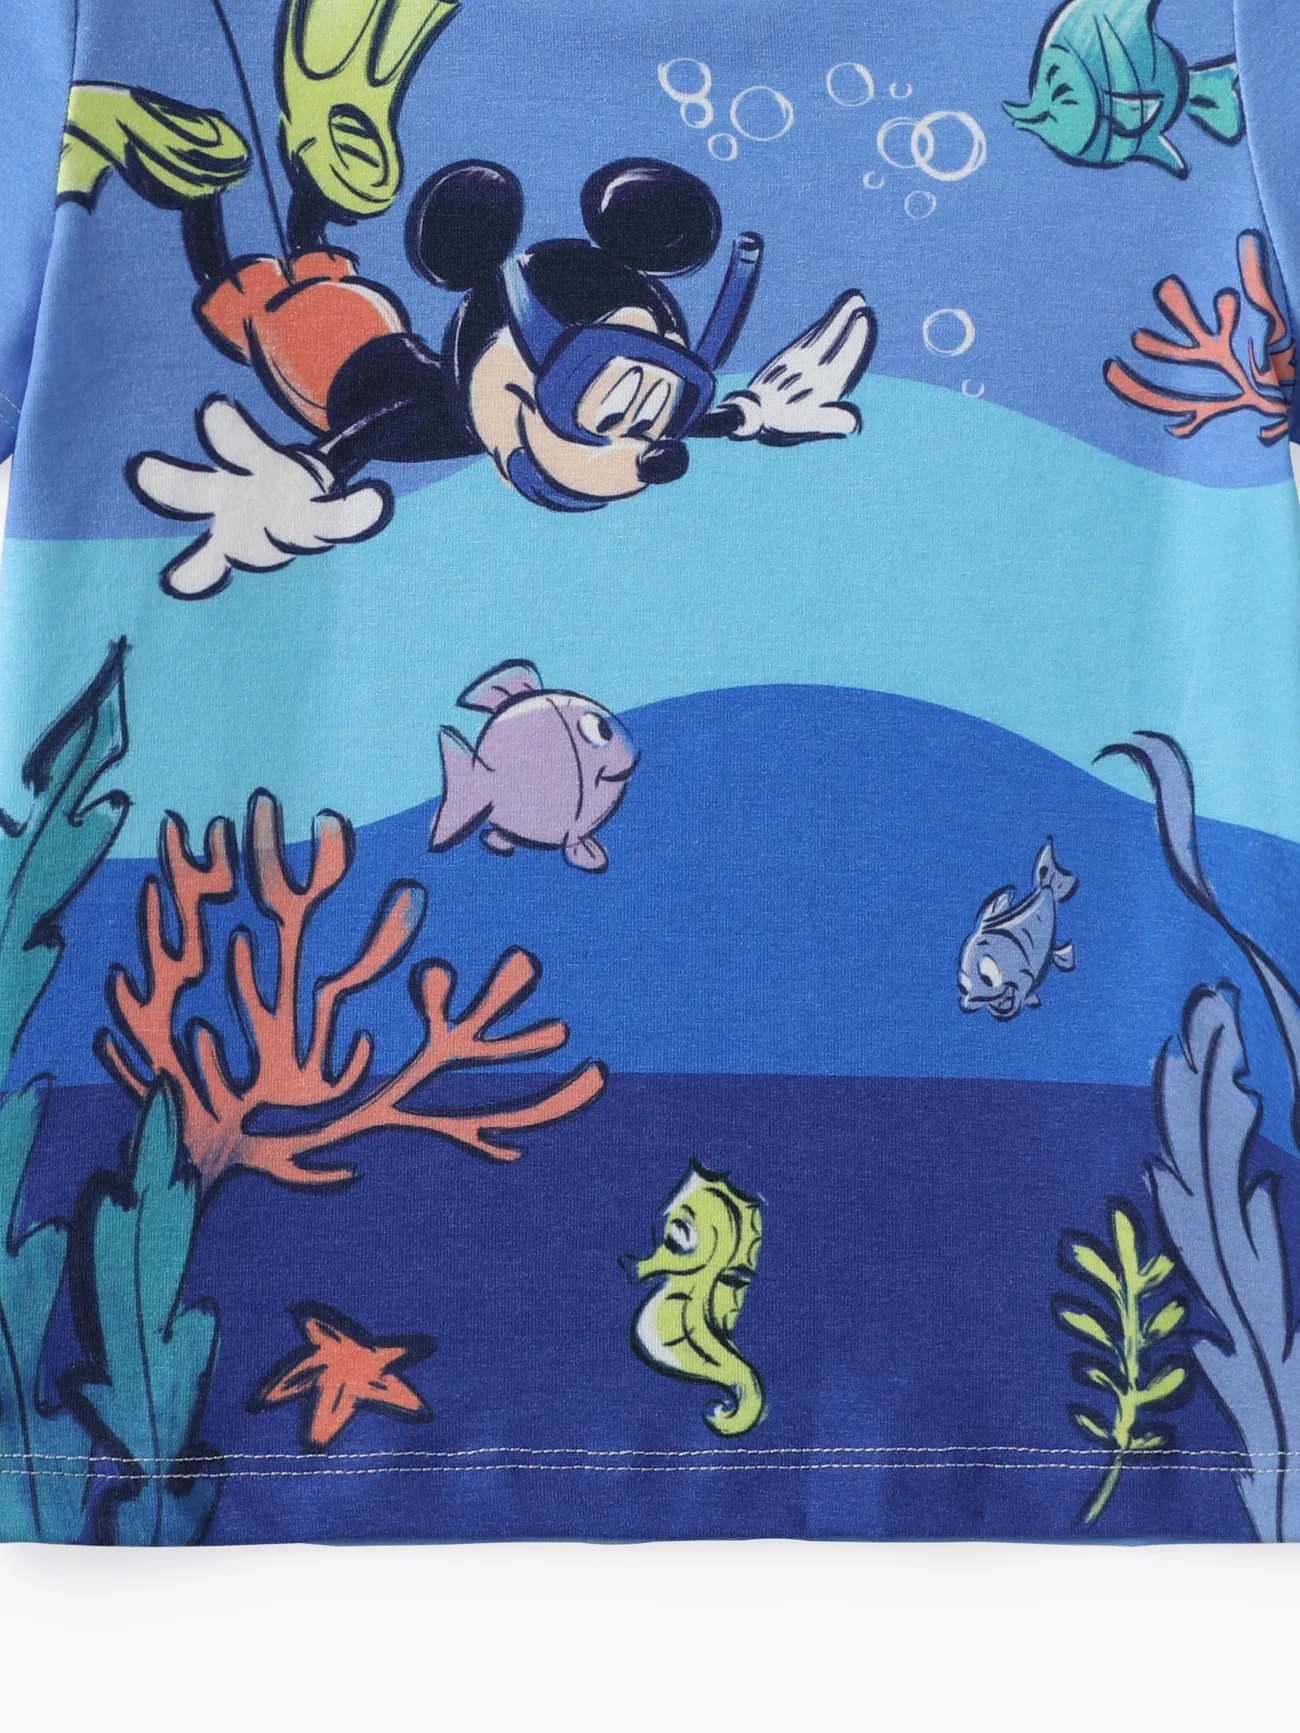 Disney Mickey and Friends Toddler Boys 2pcs Naia™ Ocean-themed Tee with Shorts Set Blue big image 1